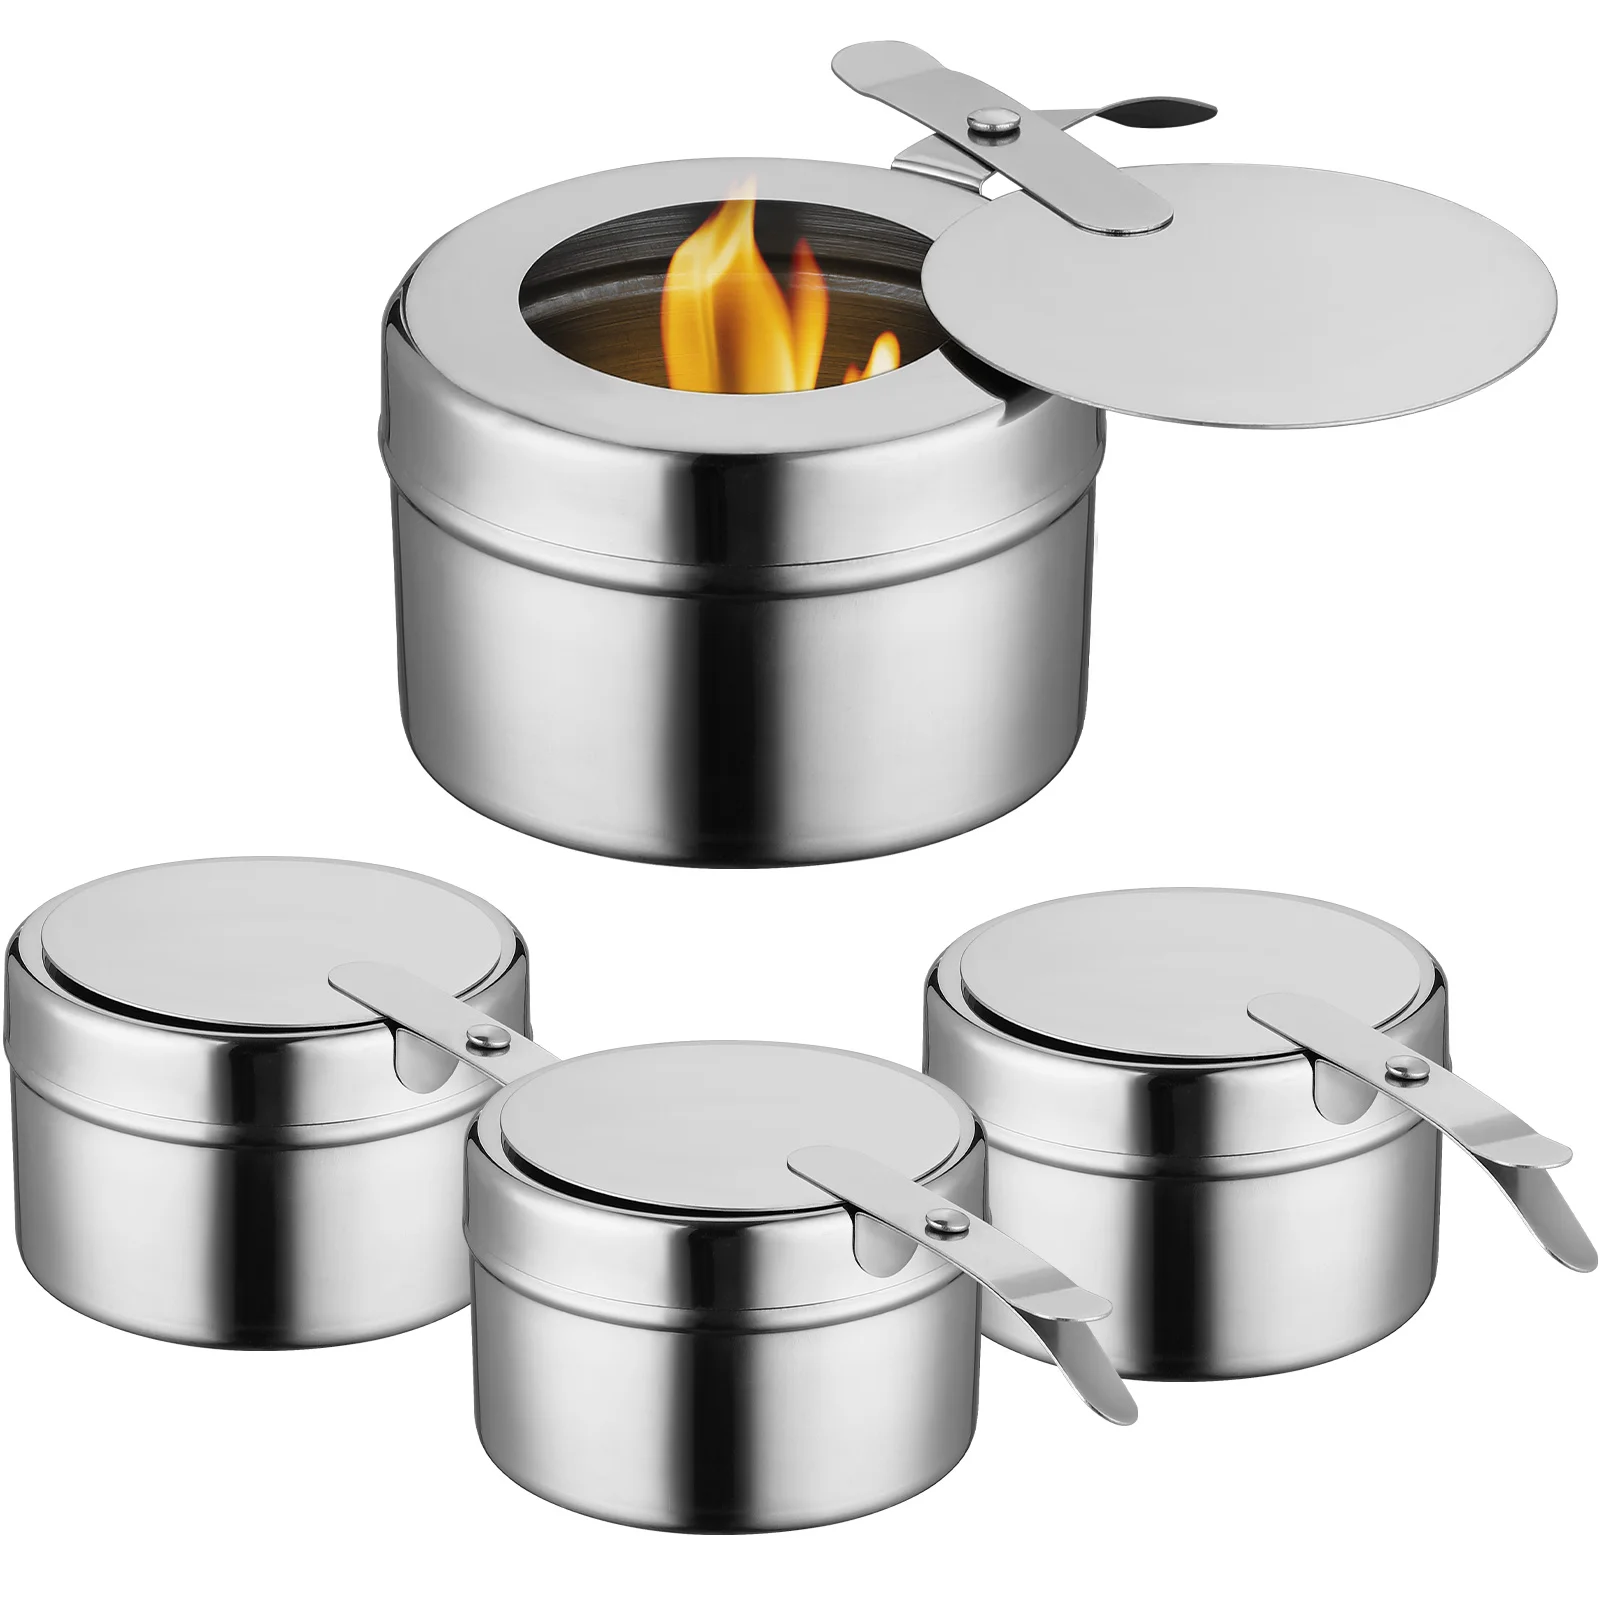 

4 Pcs Fuel Holder Cover Chafer Wick Cans Tank Heater Chafing Lid Chaffing Dish Warmers Canned Holders Small Boxs Buffet